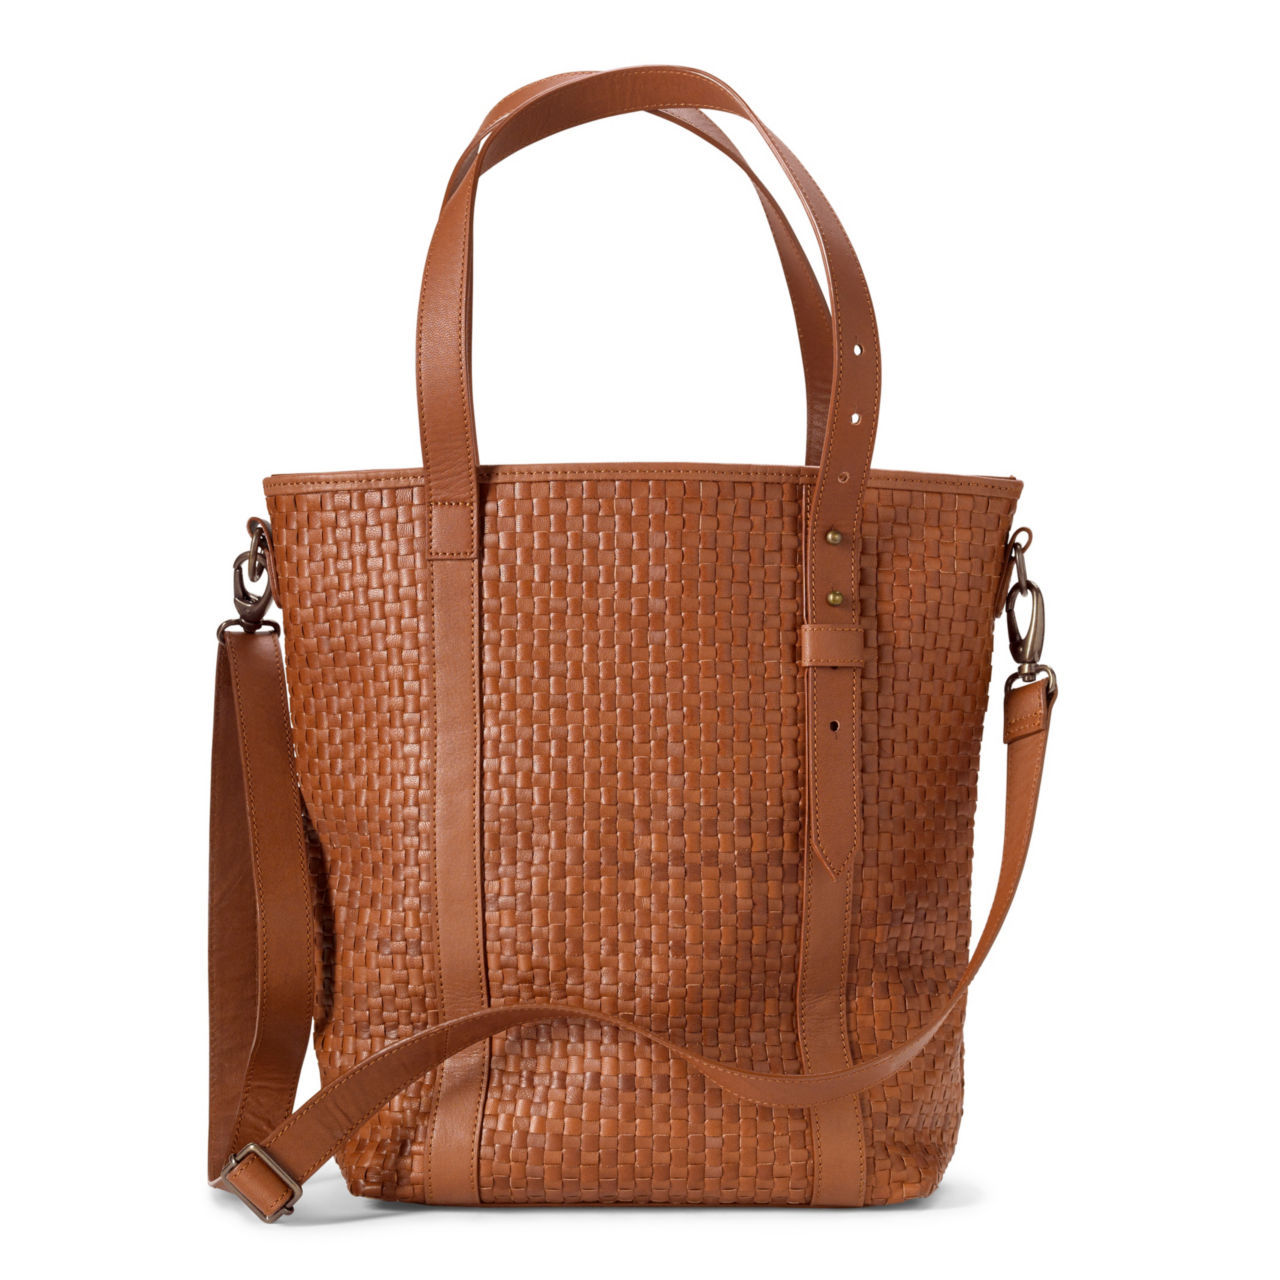 Saddle Ridge Woven Leather Tote - COGNAC image number 2